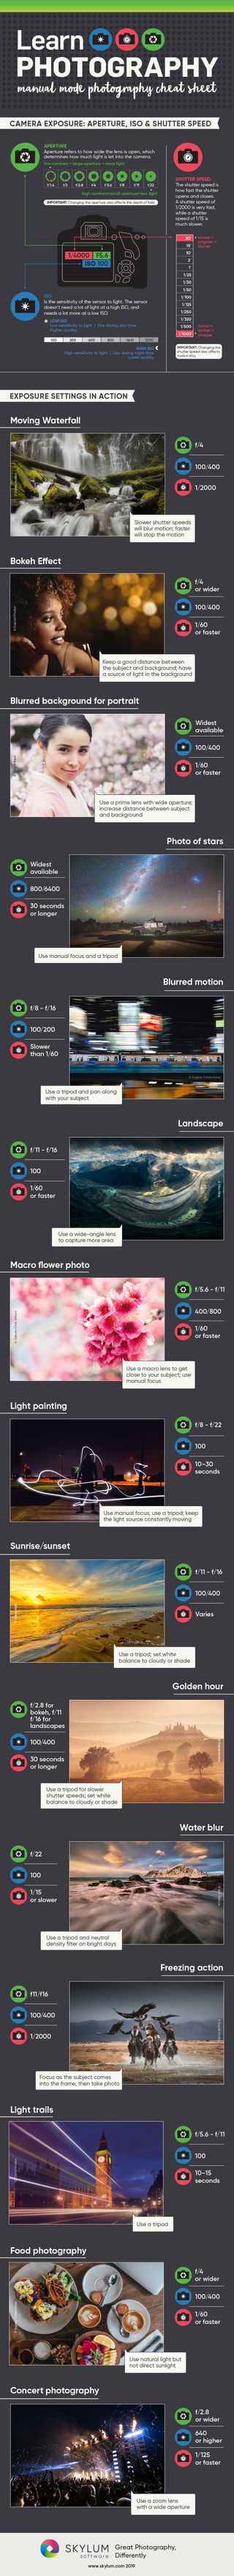 The photography cheat sheet infographic